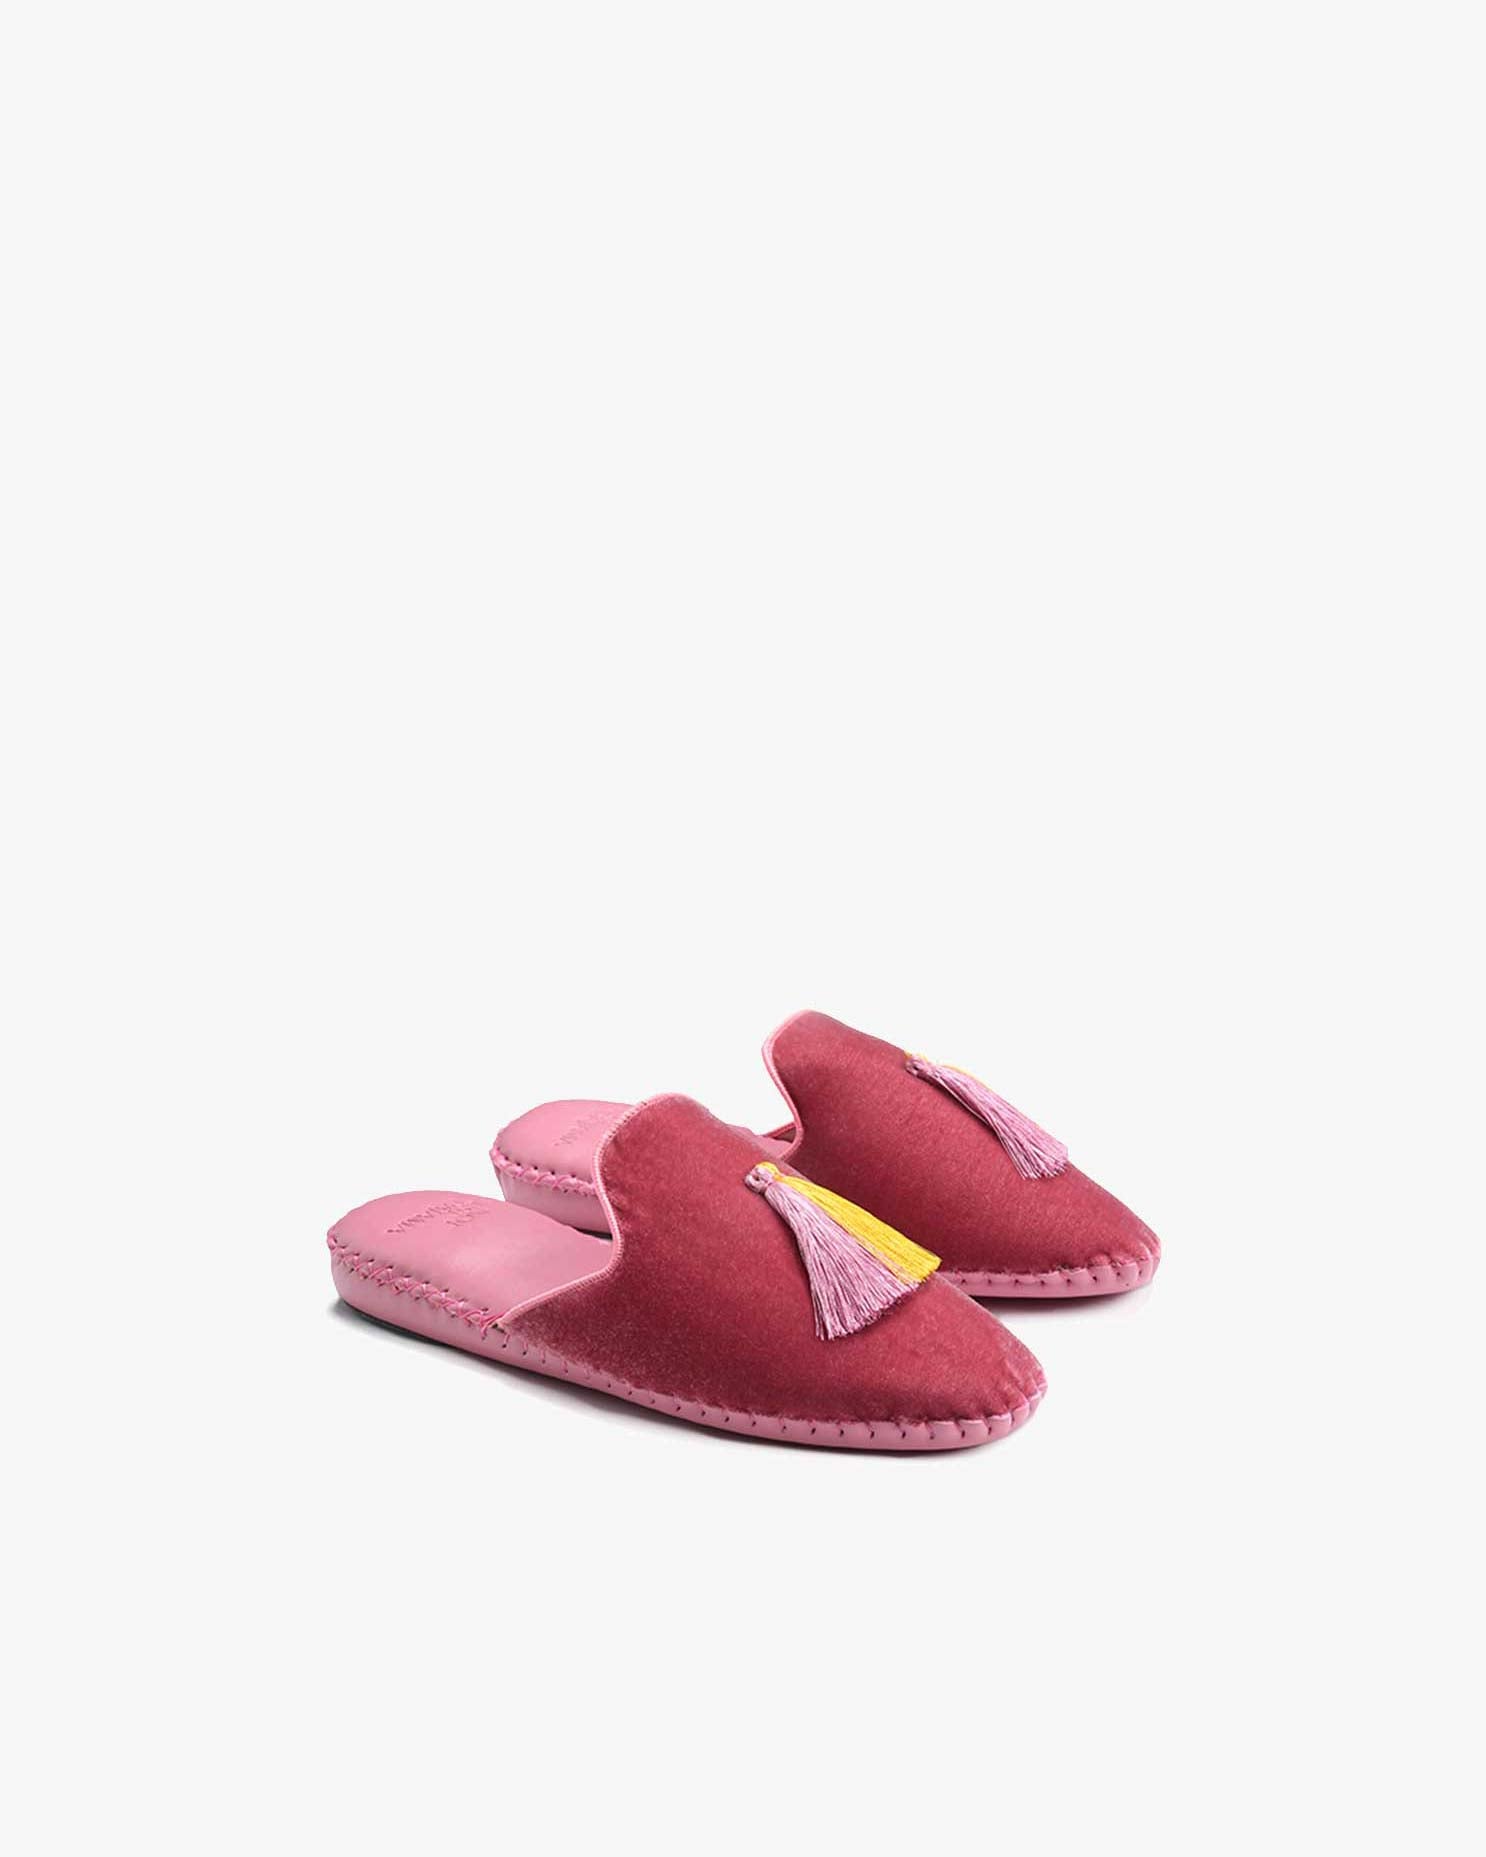 Woman Classic Handmade Flats in Pink